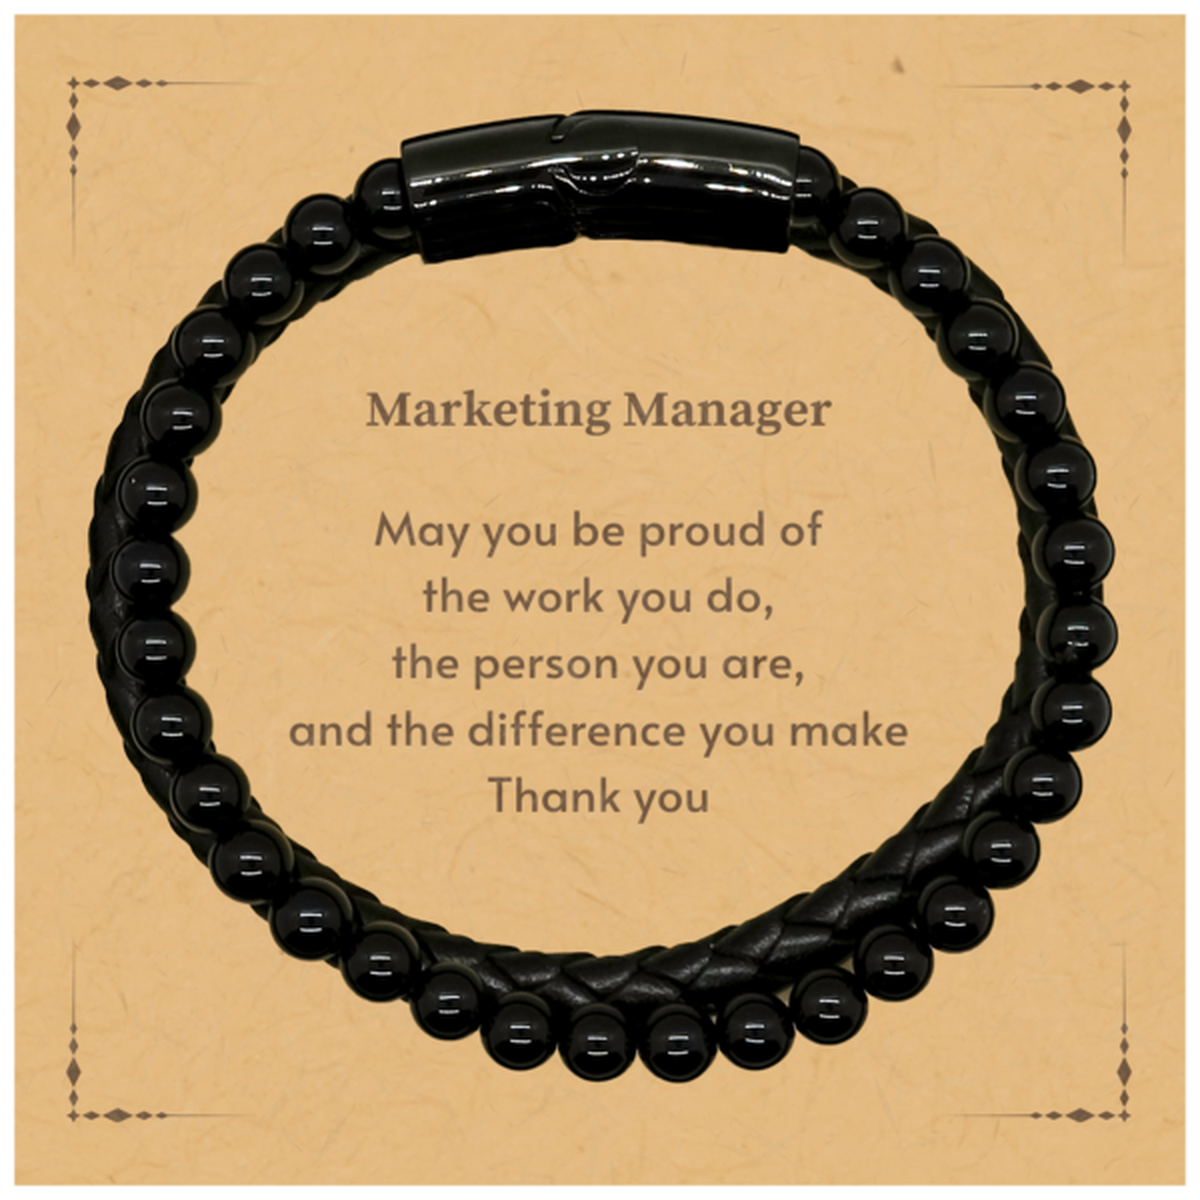 Heartwarming Stone Leather Bracelets Retirement Coworkers Gifts for Marketing Manager, Marketing Manager May You be proud of the work you do, the person you are Gifts for Boss Men Women Friends